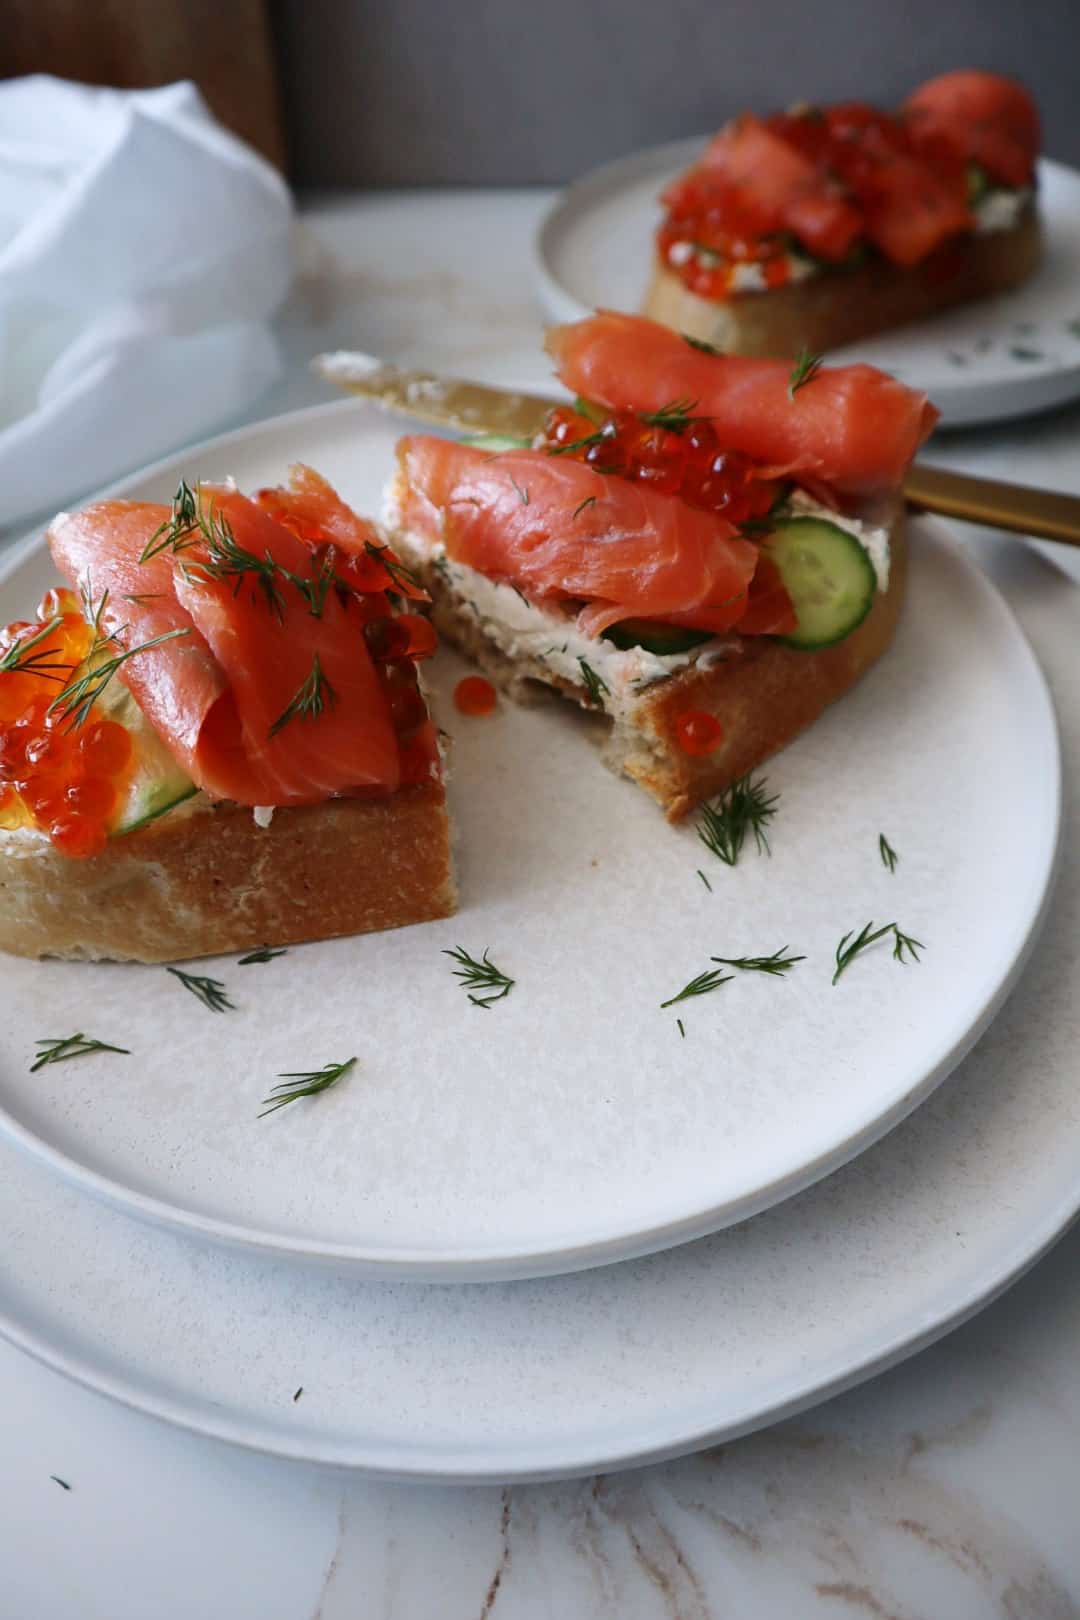 Lox Salmon Toast with Cucumber and Roe